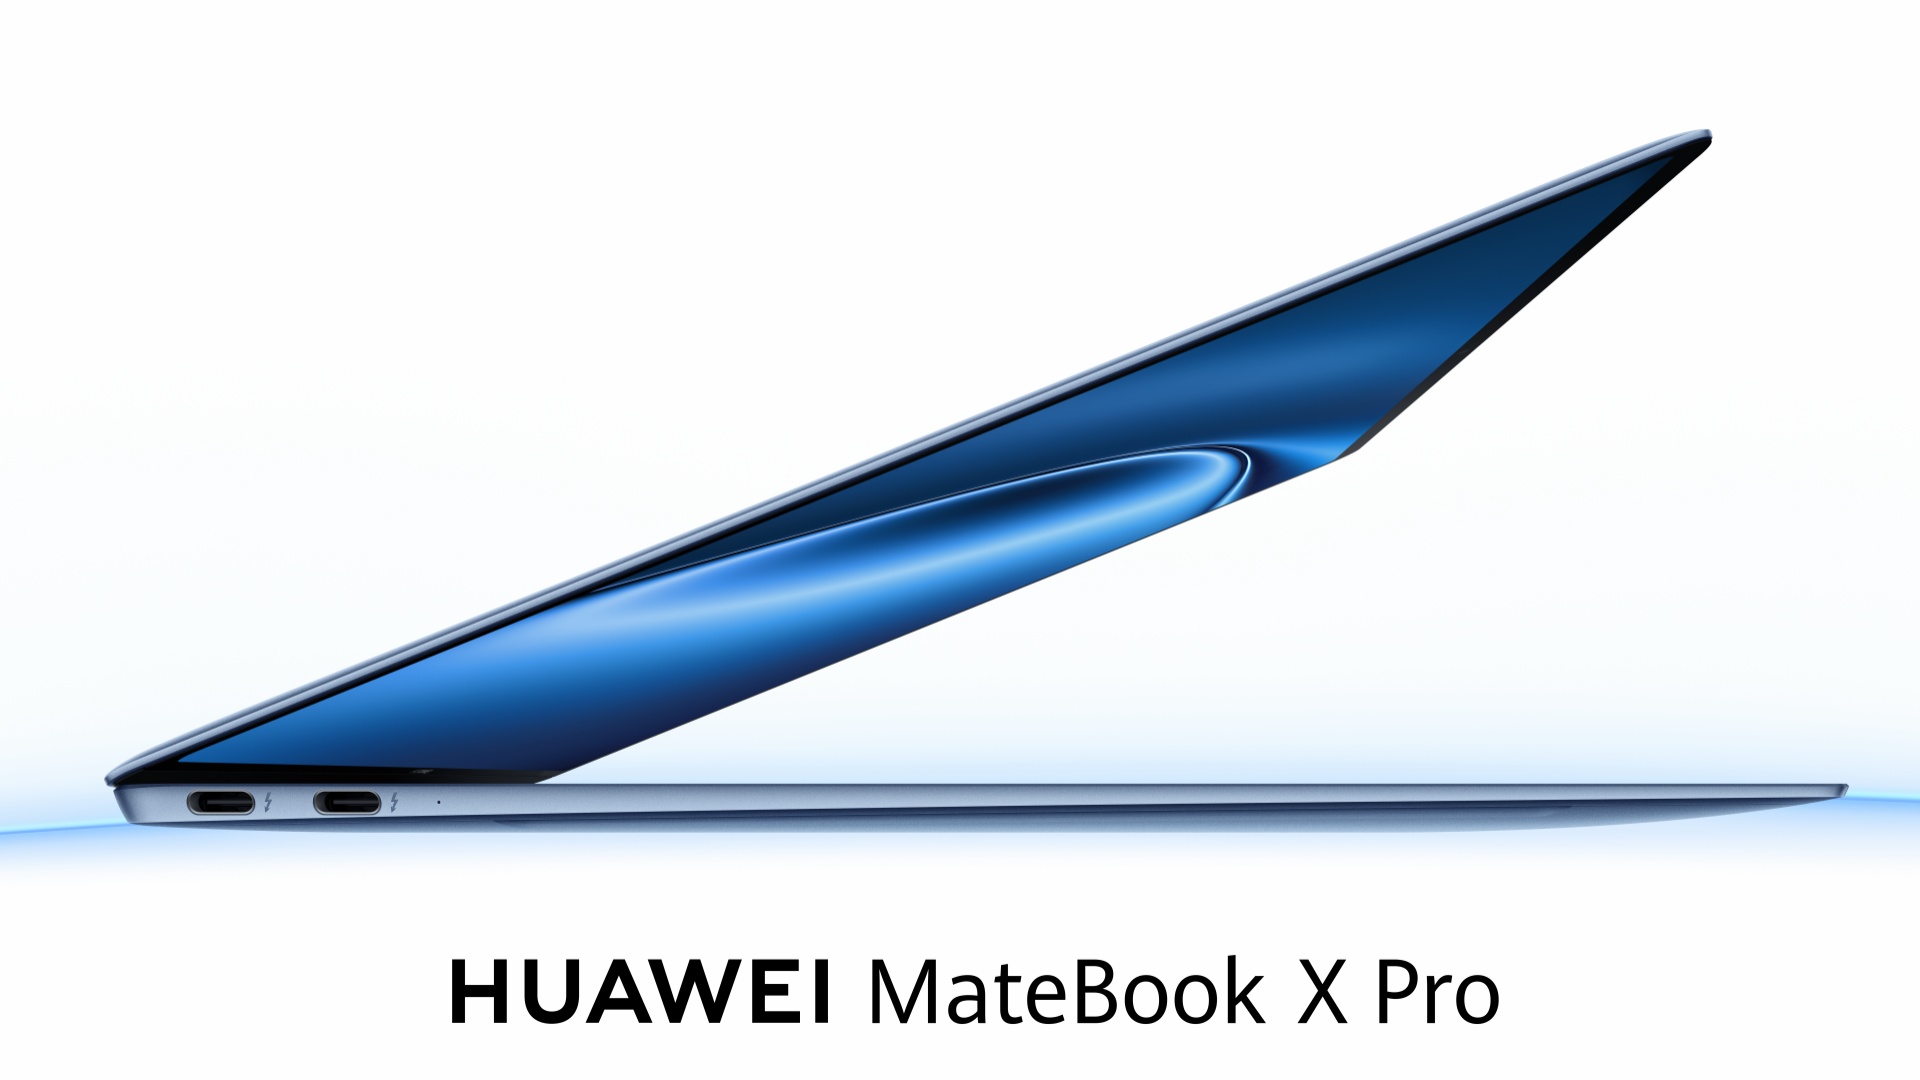 Huawei MateBook X Pro updated with flexible OLED display and ultralight body [Video]